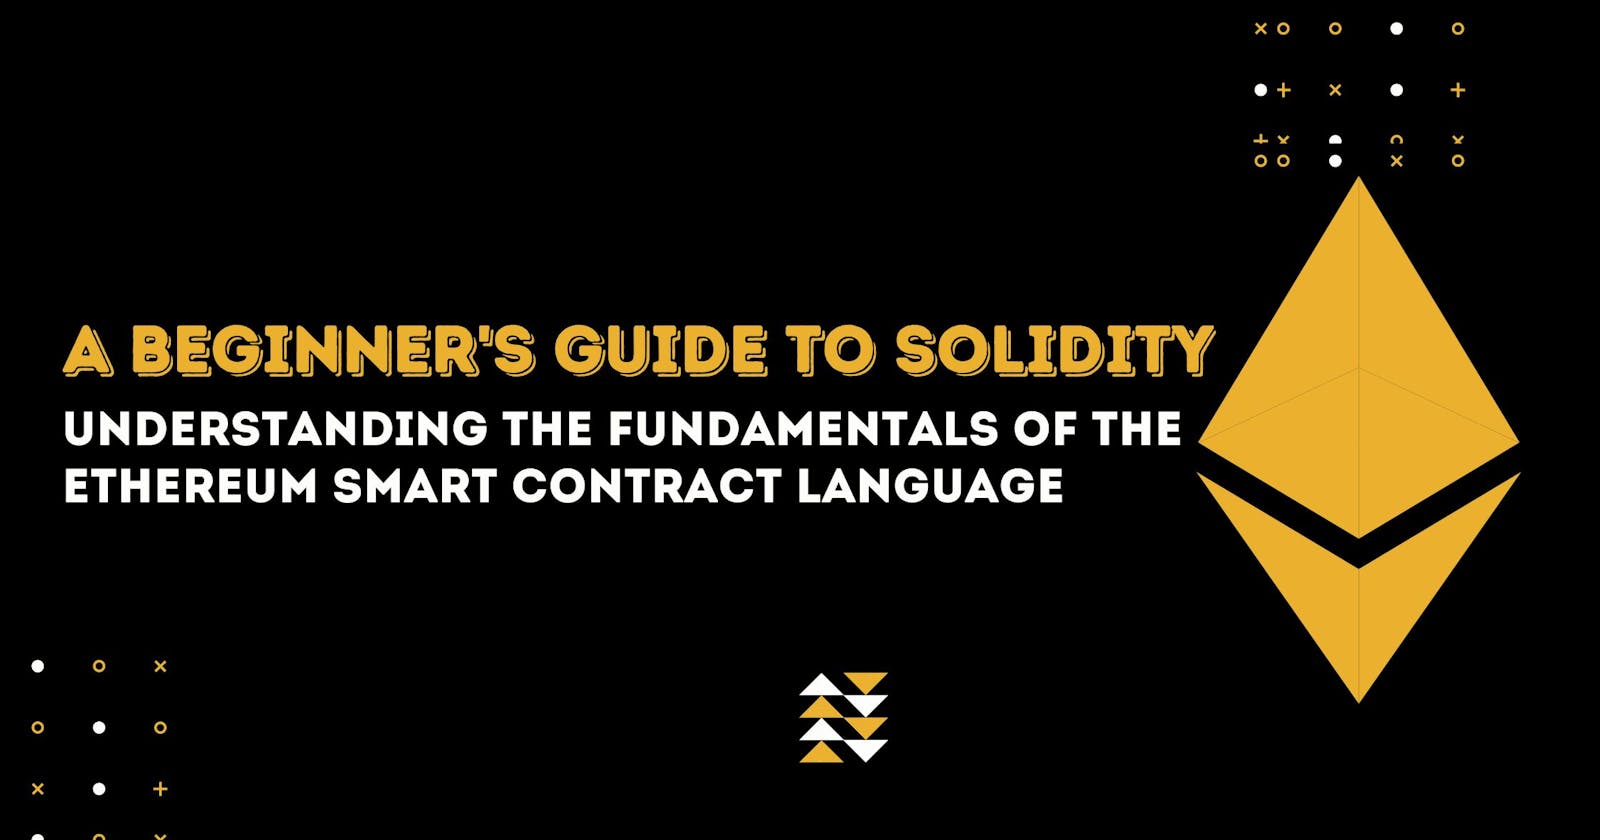 A Beginner's Guide to Solidity: